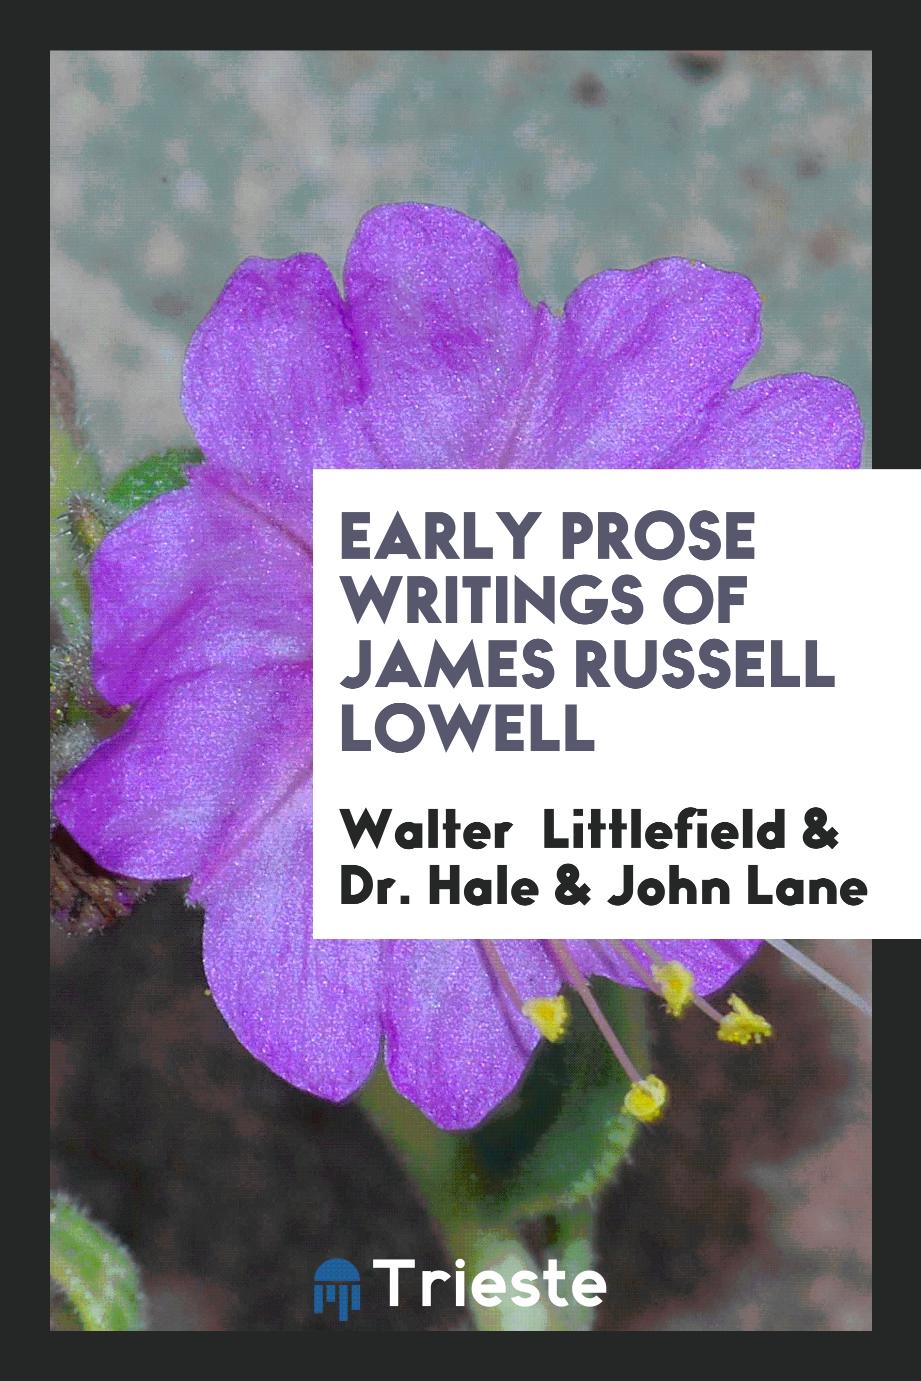 Early prose writings of James Russell Lowell